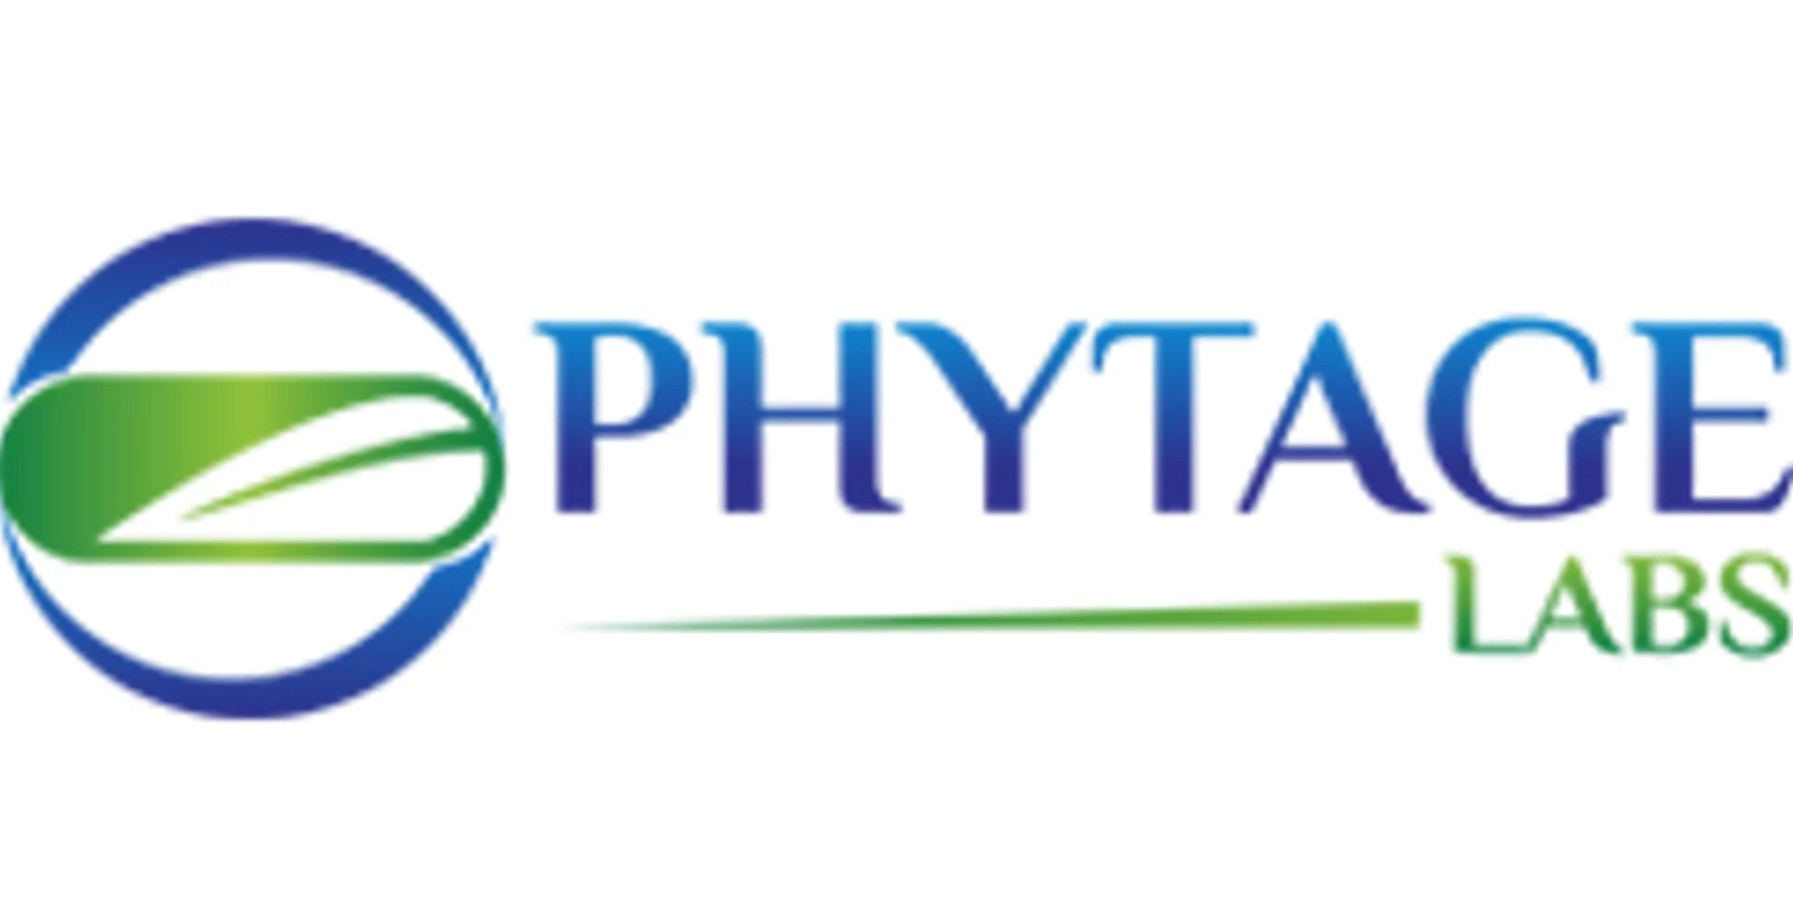 PhytAge labs